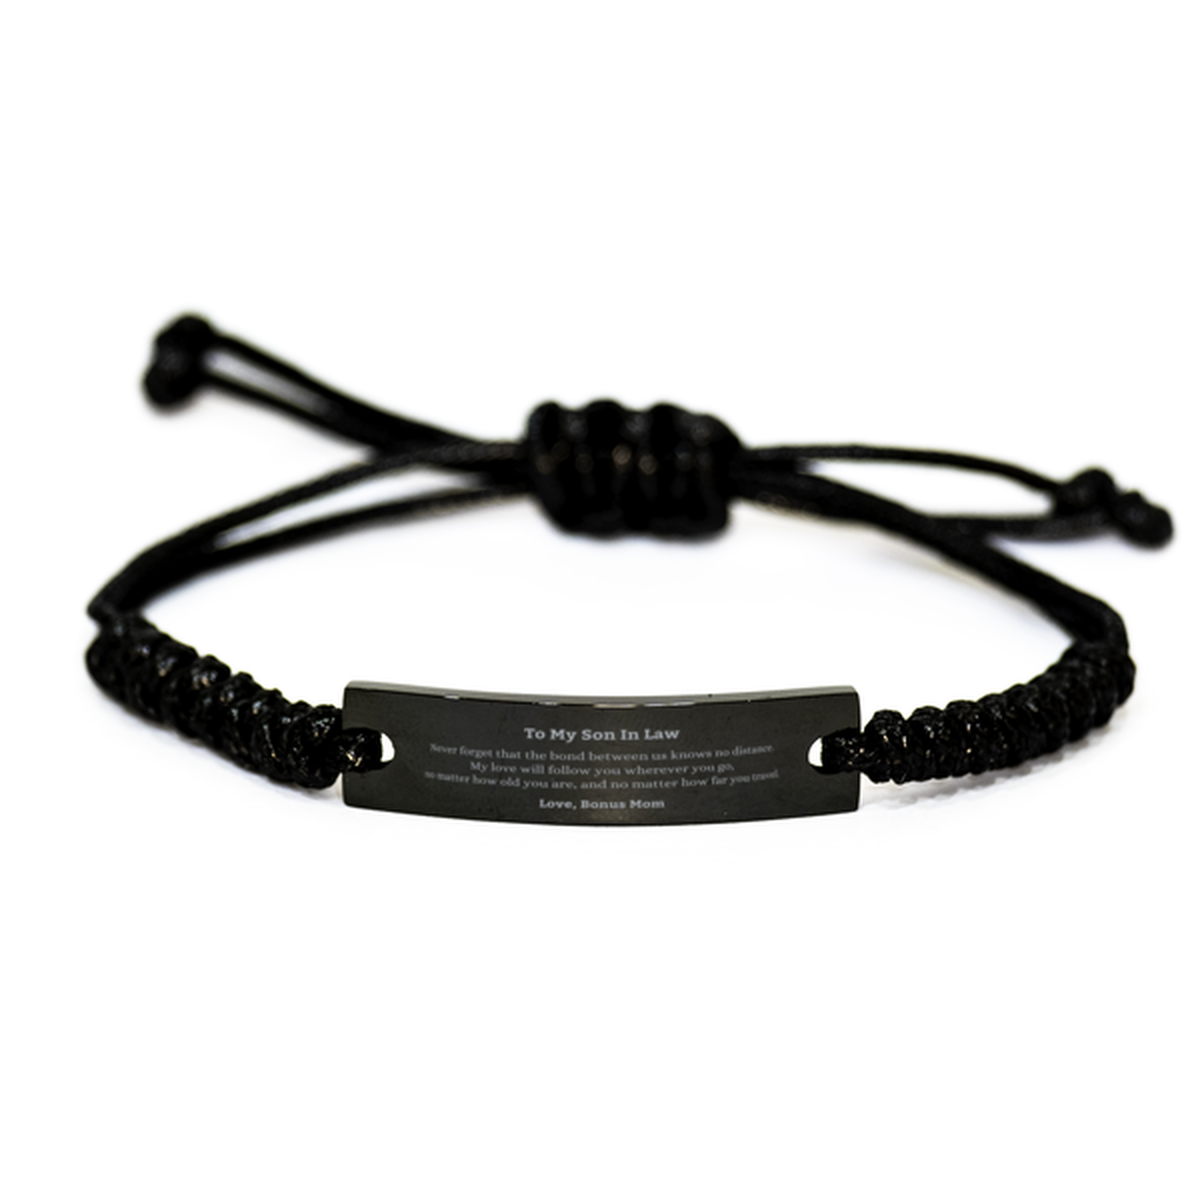 Son In Law Birthday Gifts from Bonus Mom, Adjustable Black Rope Bracelet for Son In Law Christmas Graduation Unique Gifts Son In Law Never forget that the bond between us knows no distance. Love, Bonus Mom